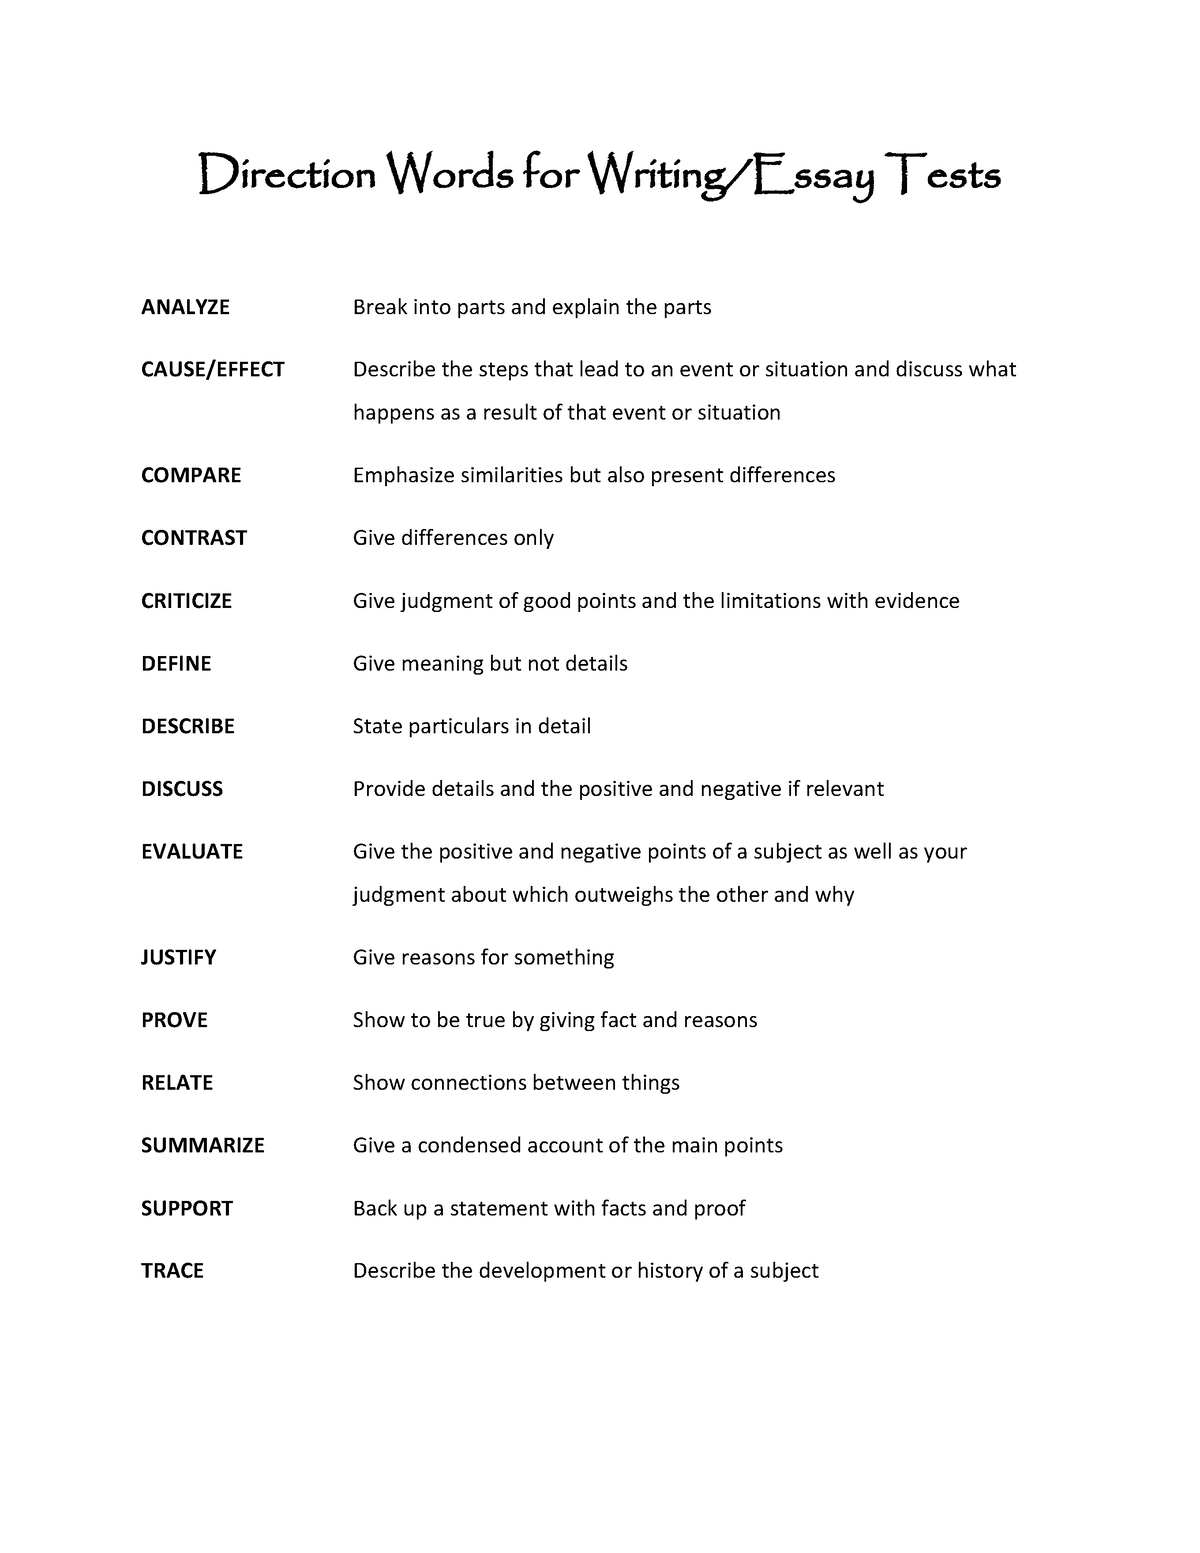 sample directions for essay test